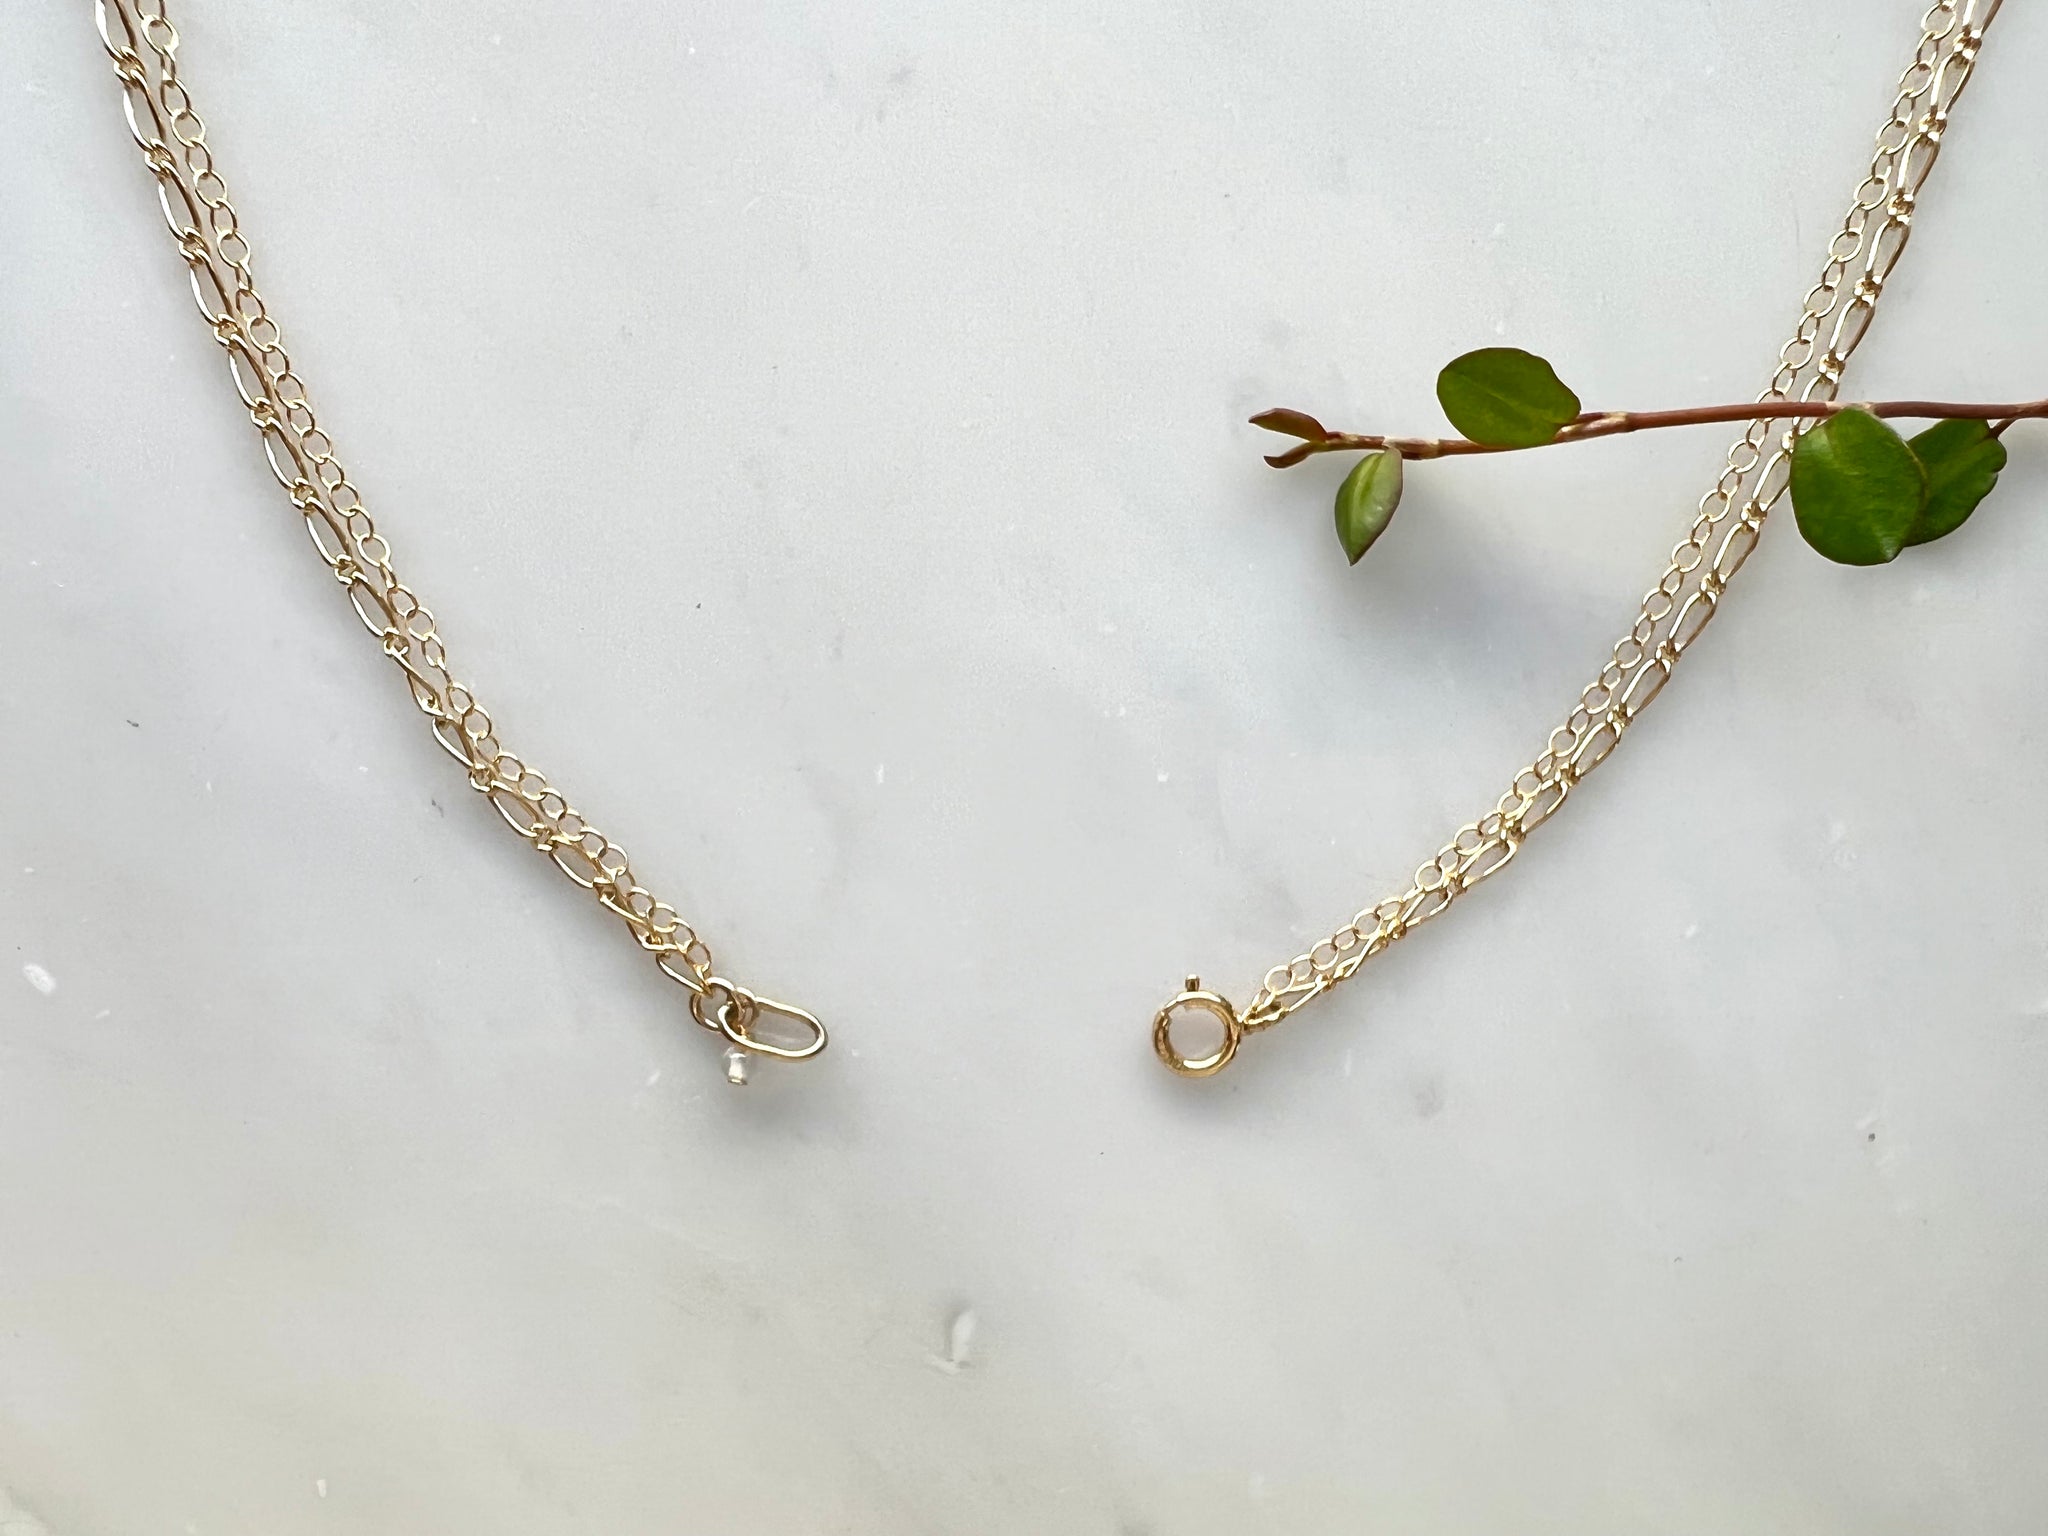 Chain Necklace 16"(40cm) 14K Gold Filled / チェーン 　ネックレス　16"(40cm) 14K ゴールドフィルド